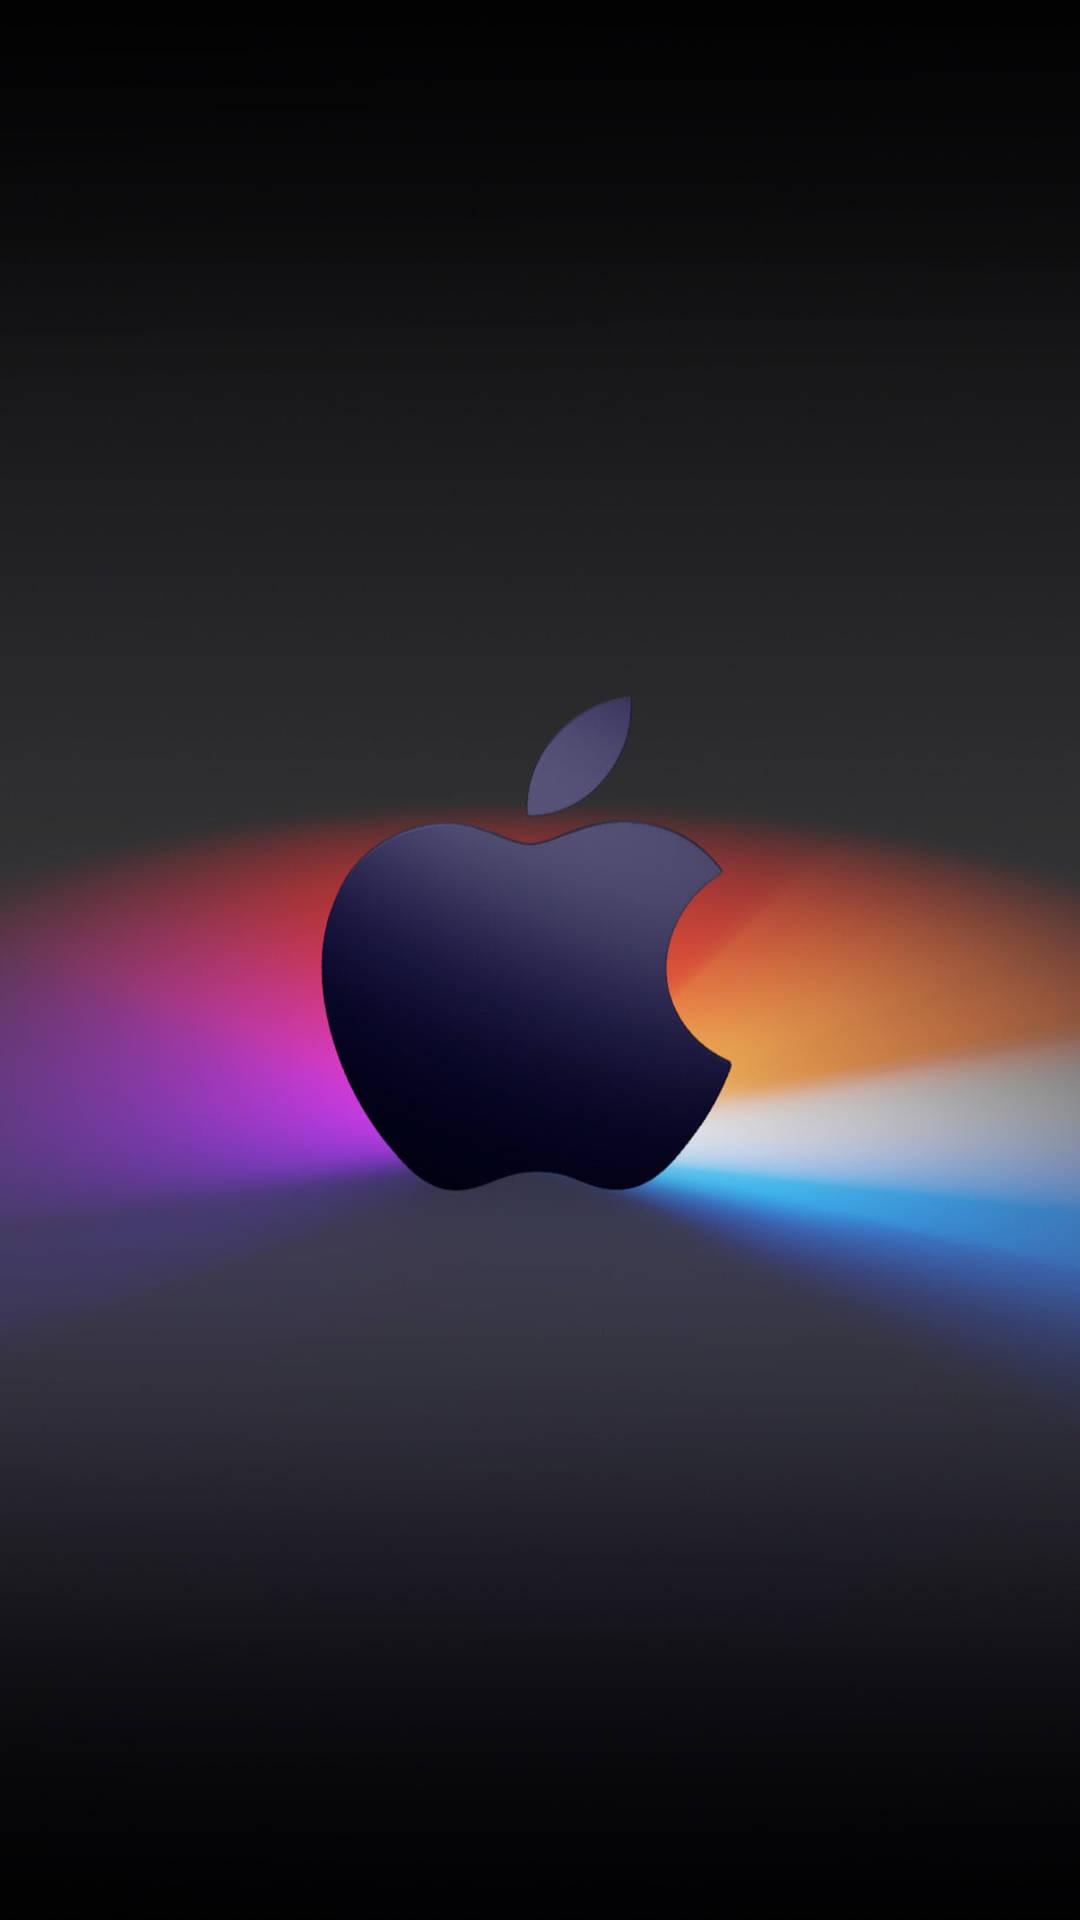 Full Hd Apple With Bright-colored Rays Wallpaper